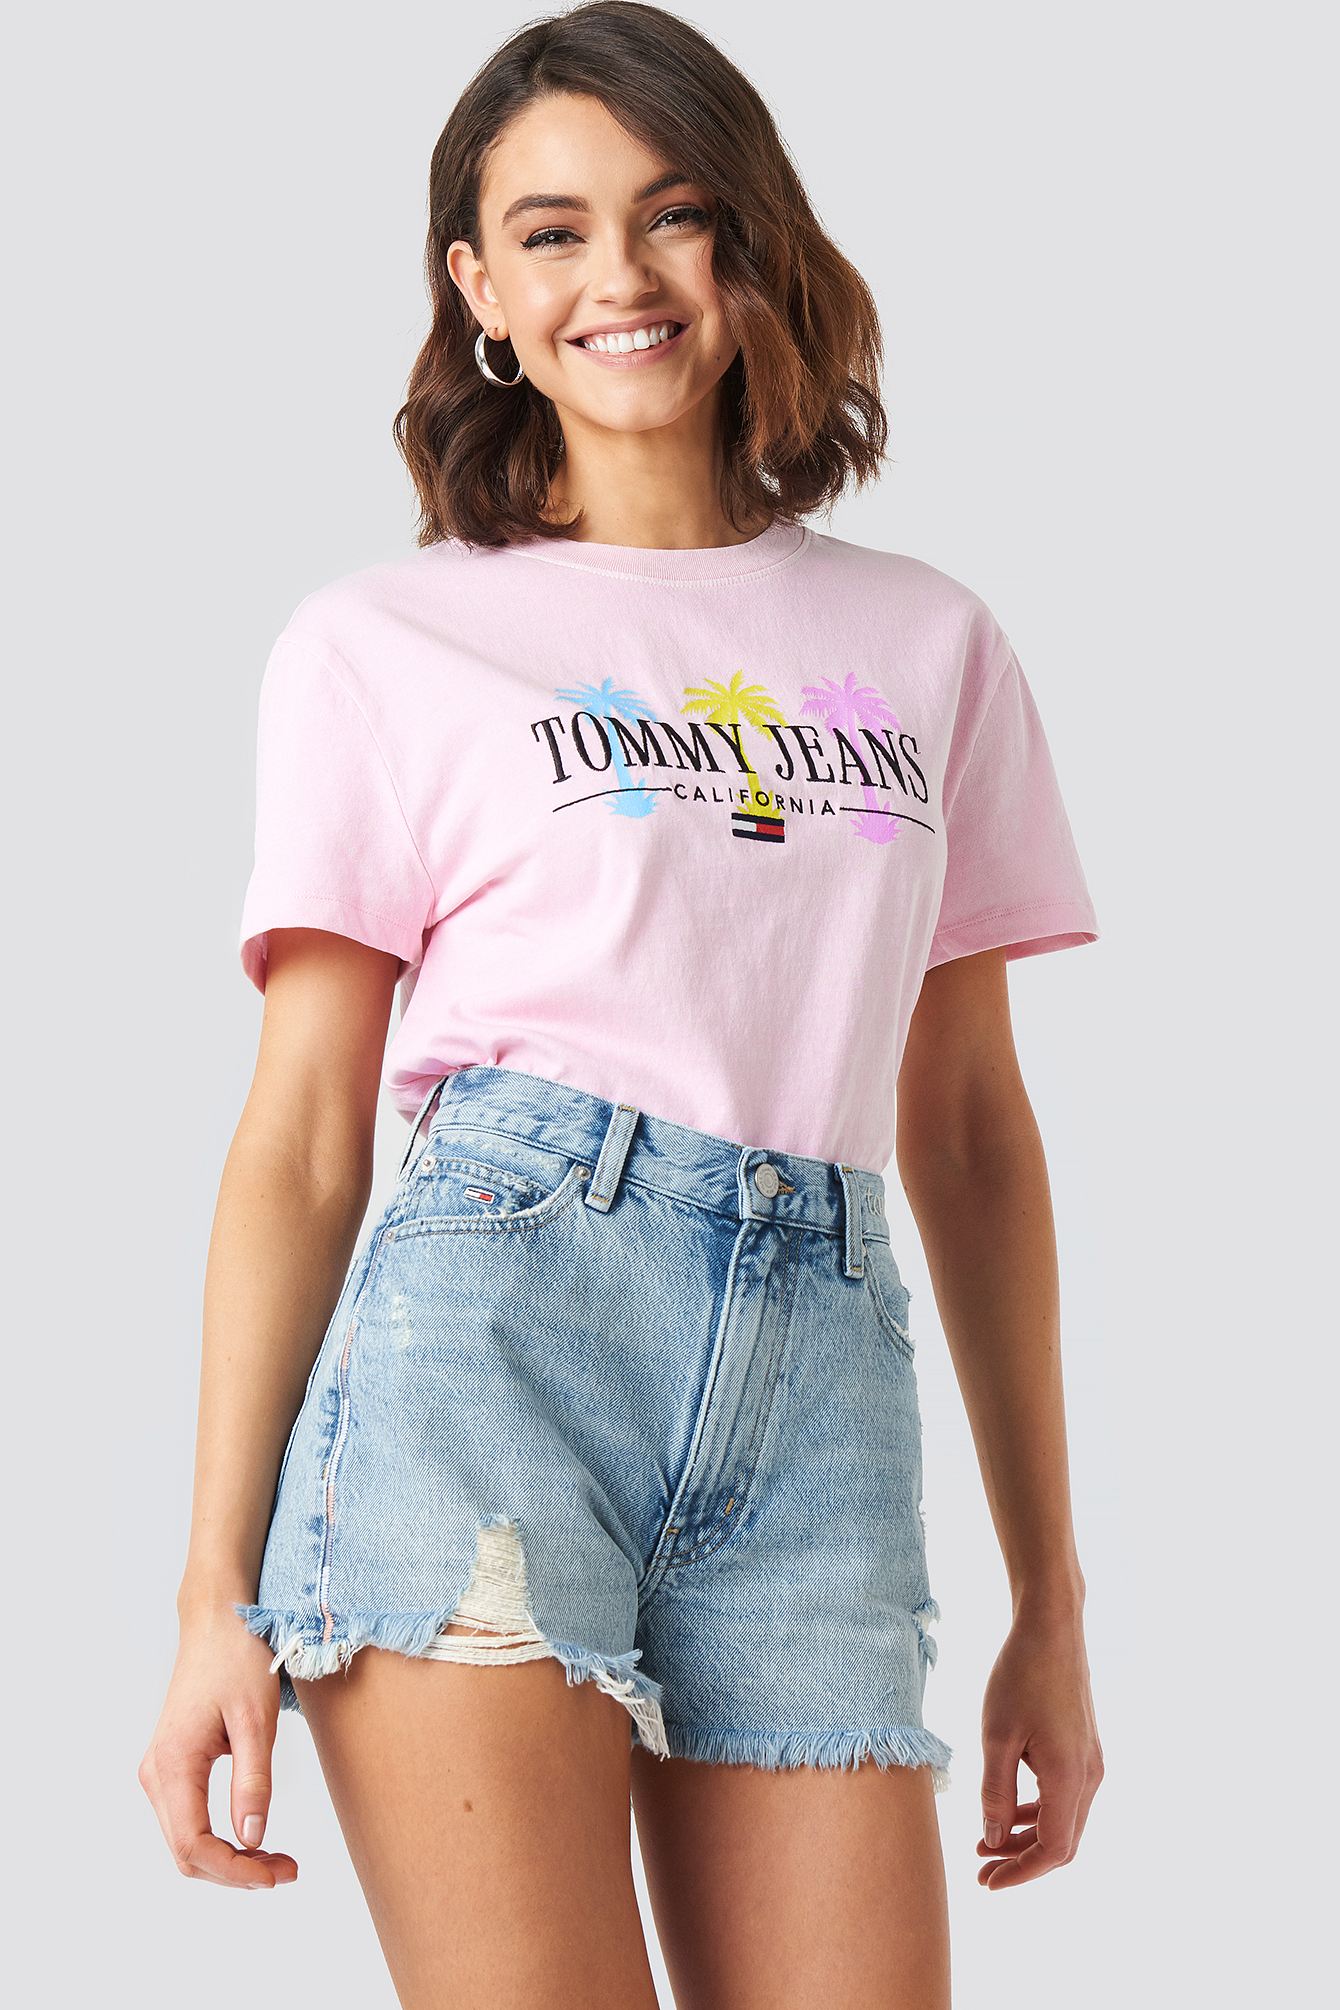 Tommy Jeans Summer Top Sellers, 50% OFF | www.hcb.cat